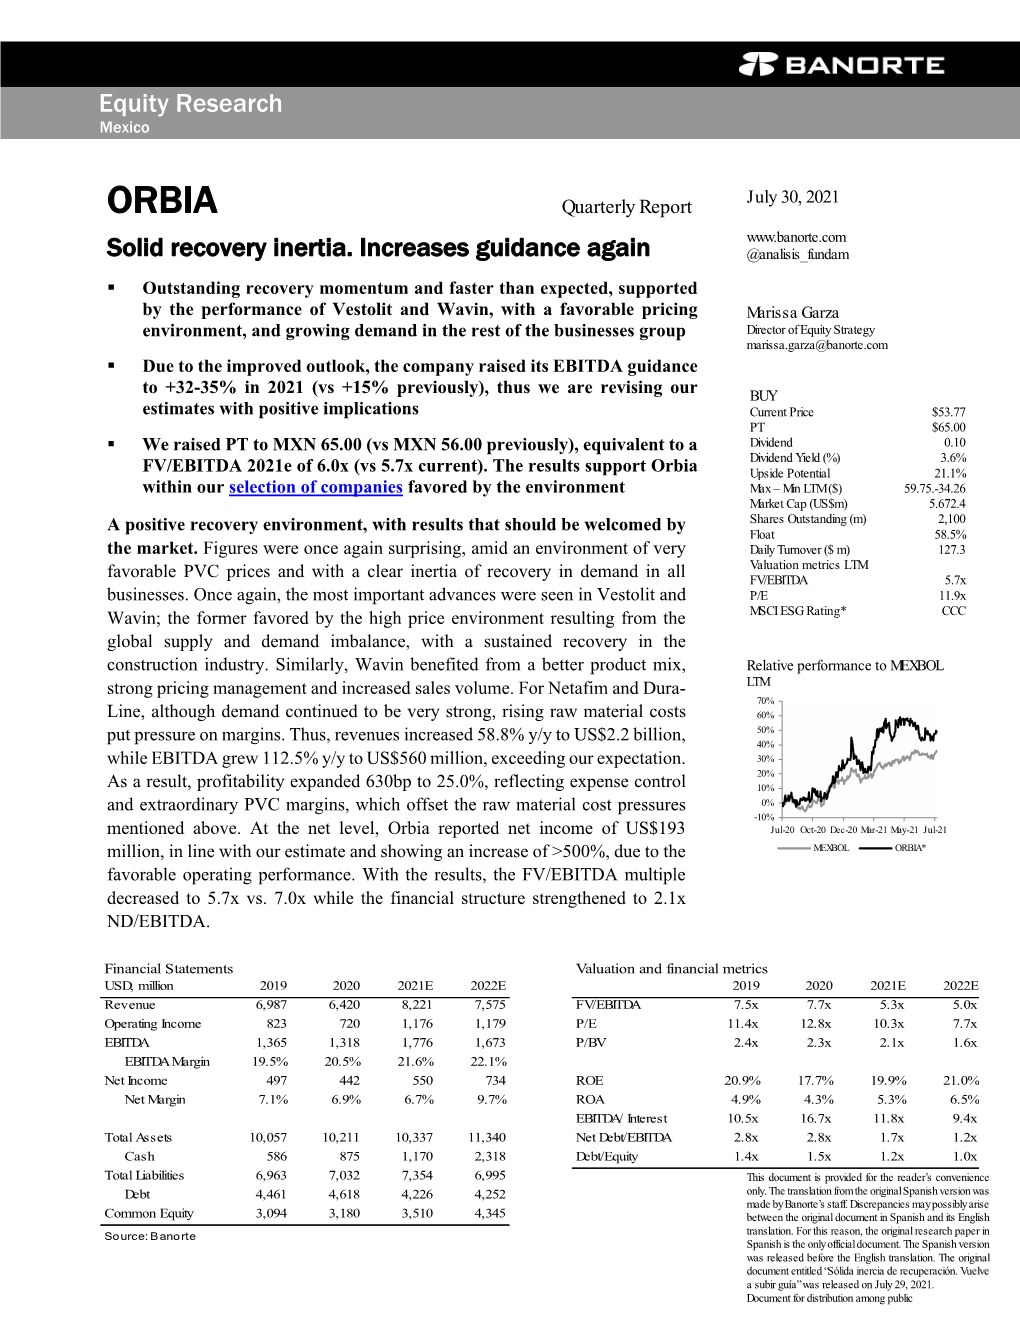 ORBIA Solid Recovery Inertia